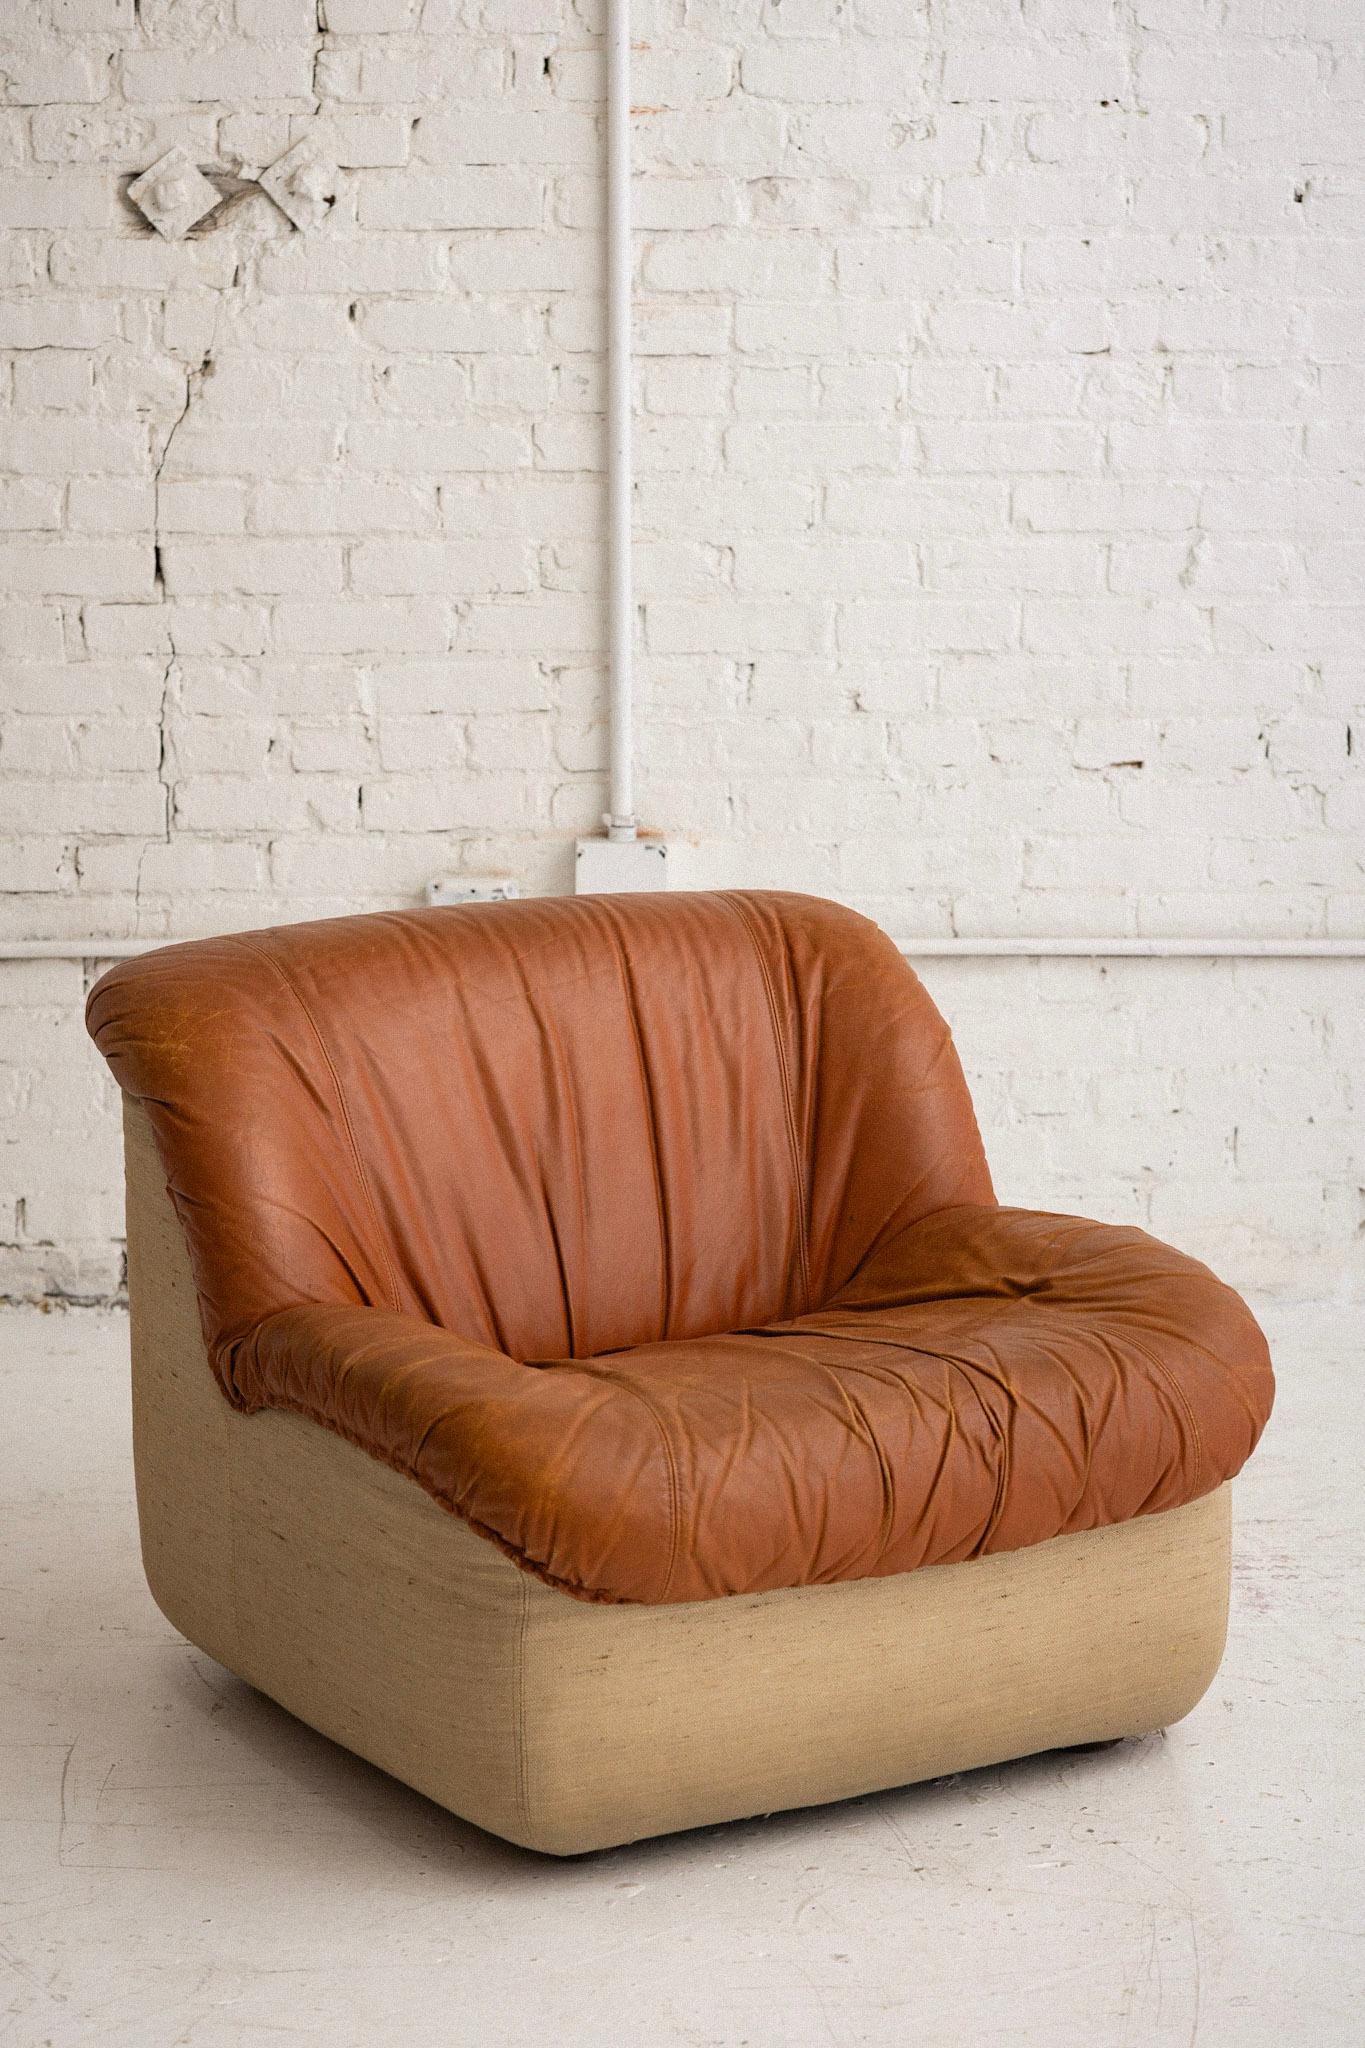 A midcentury Italian leather “Caprice” chair by Henning Korch for Swan. Leather upper and textured beige woven fabric bottom. 6 available, sold individually. Can be used separately or placed together as modular seating. Retains original “Swan” tag.